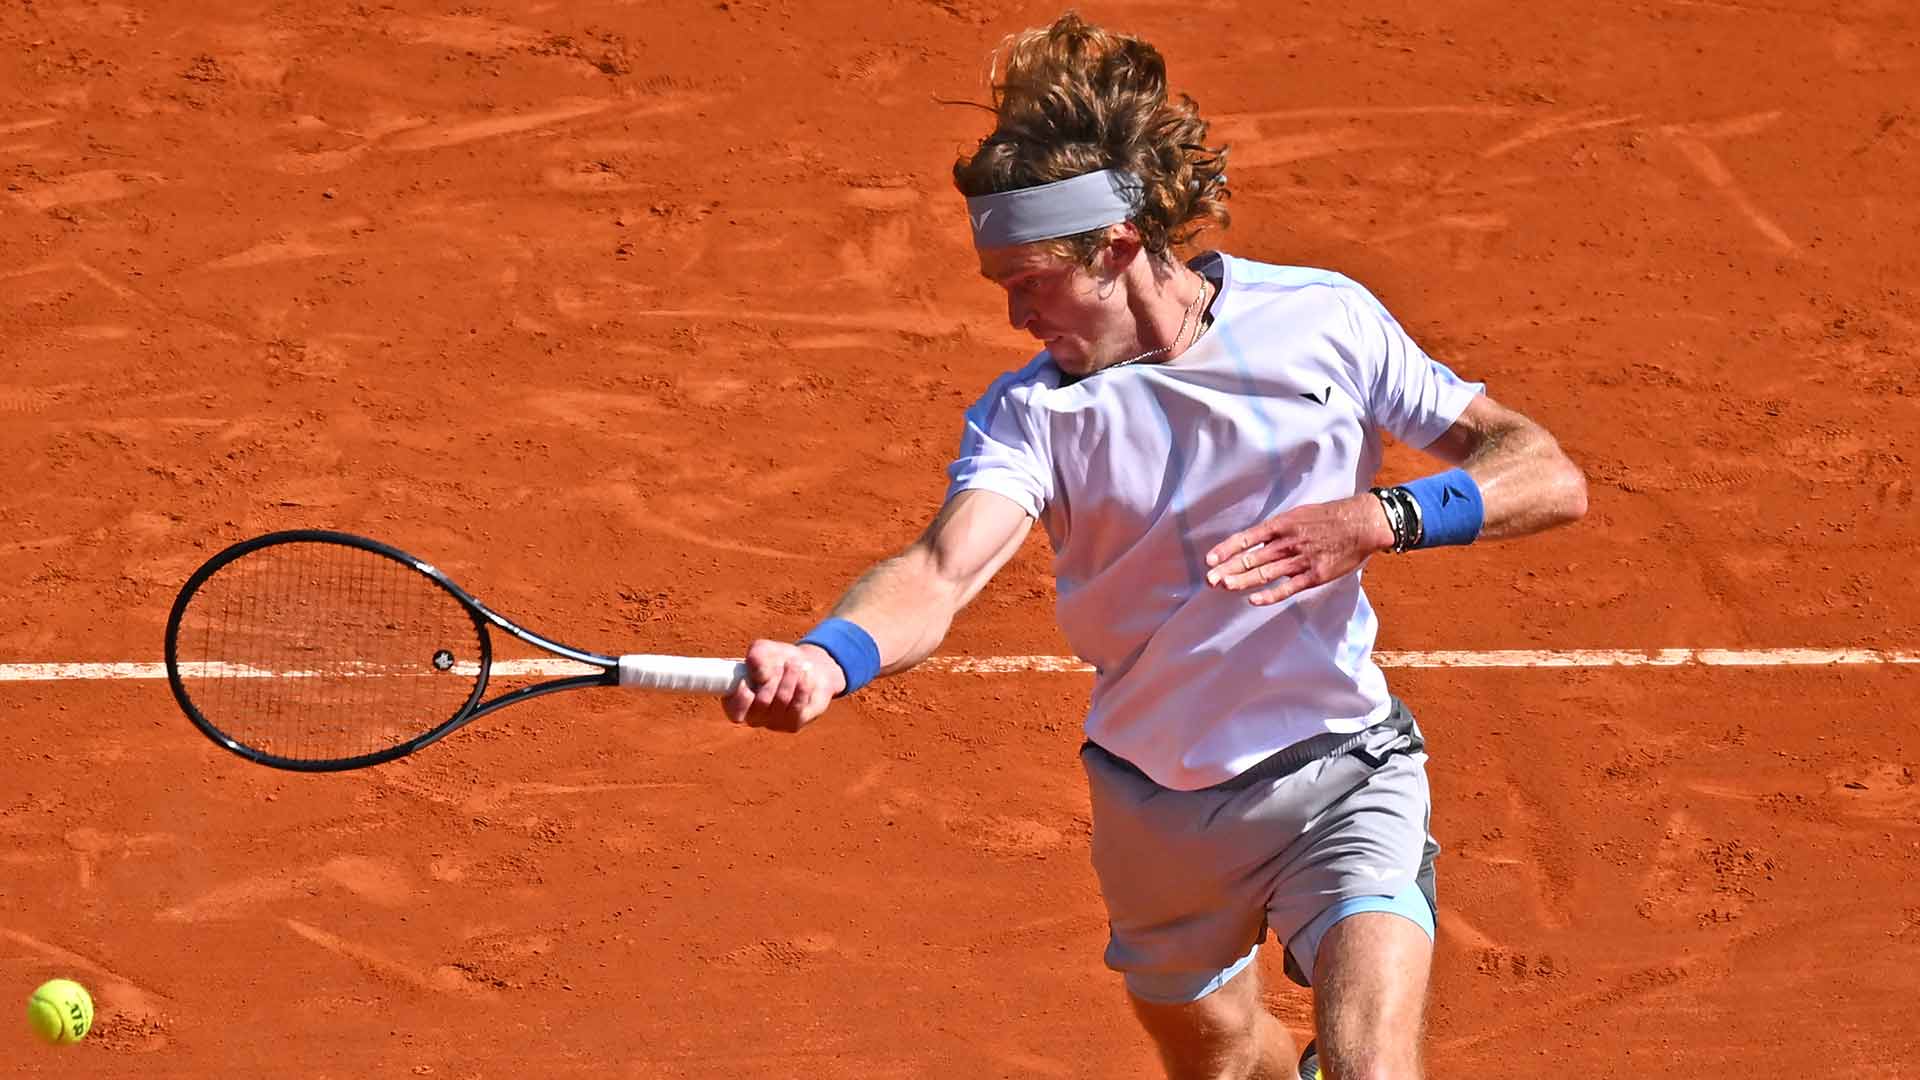 Andrey Rublev is No. 6 in the Pepperstone ATP Rankings.